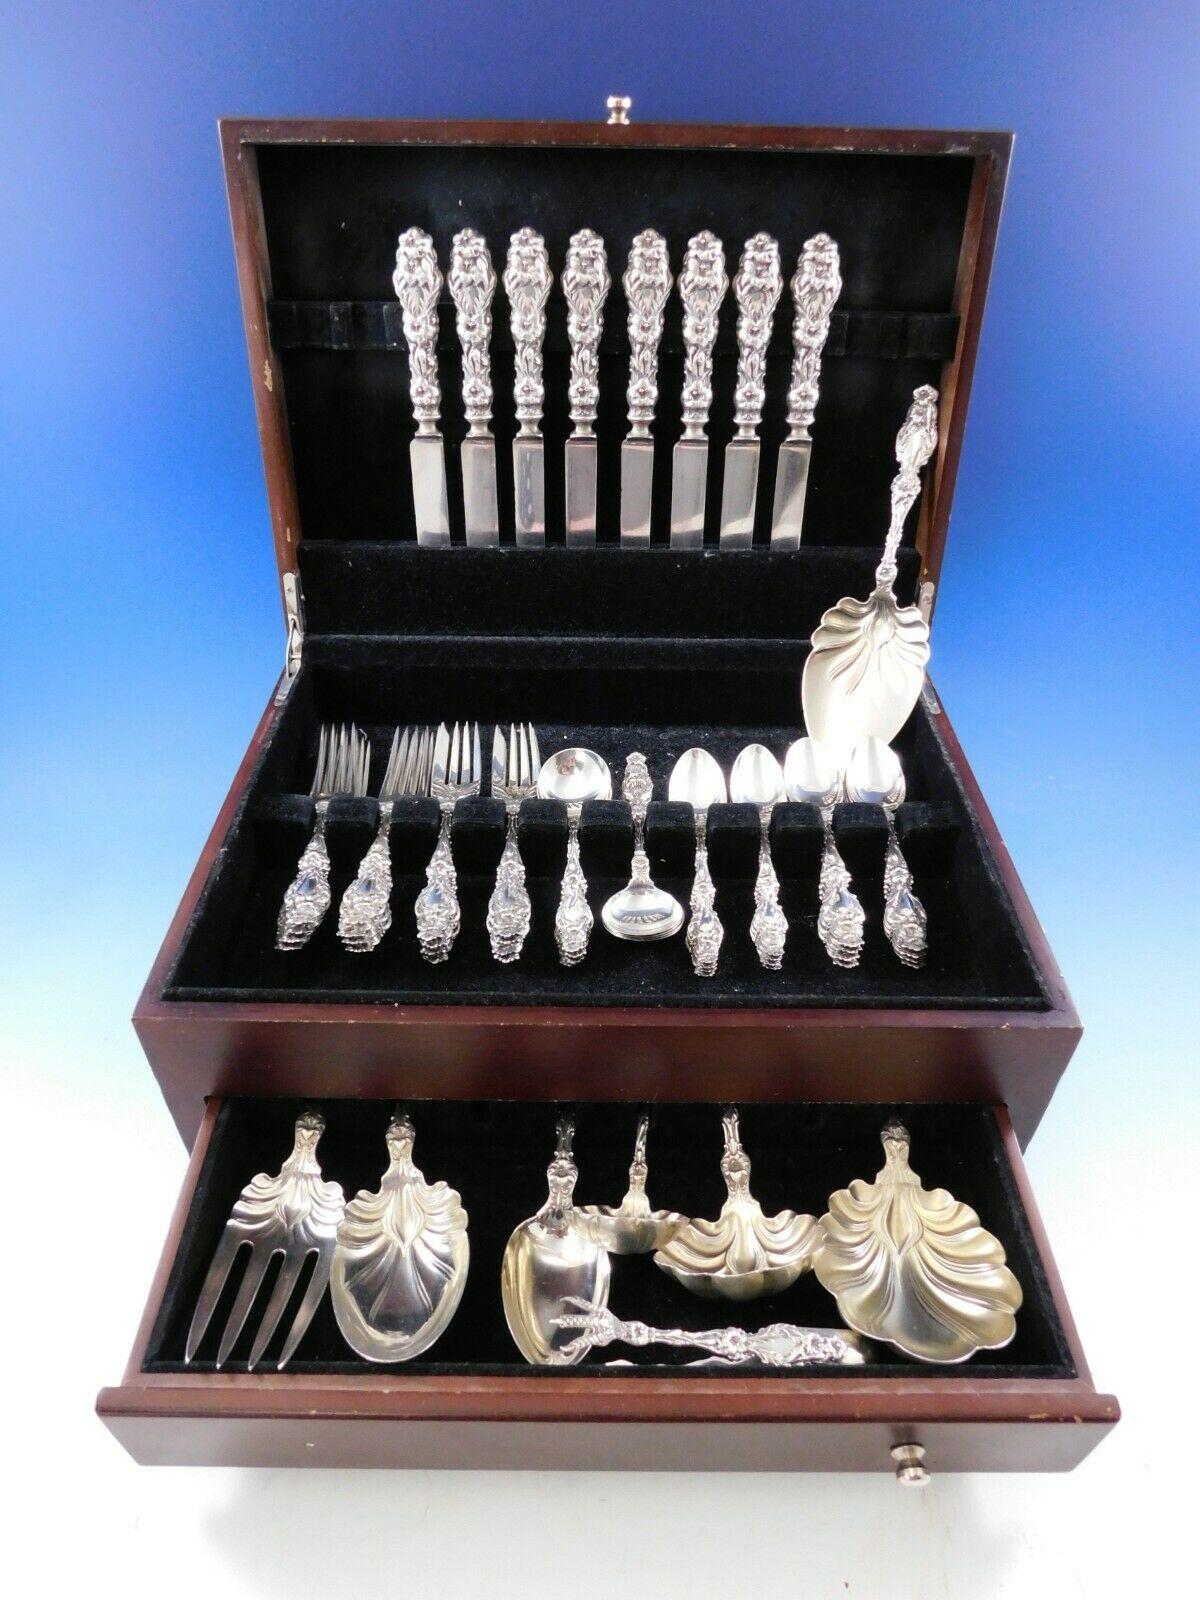 Masterfully crafted Lily by Whiting sterling silver flatware set, 56 pieces. This set includes:

8 knives with early thick handles and blunt plated blades, 8 3/4